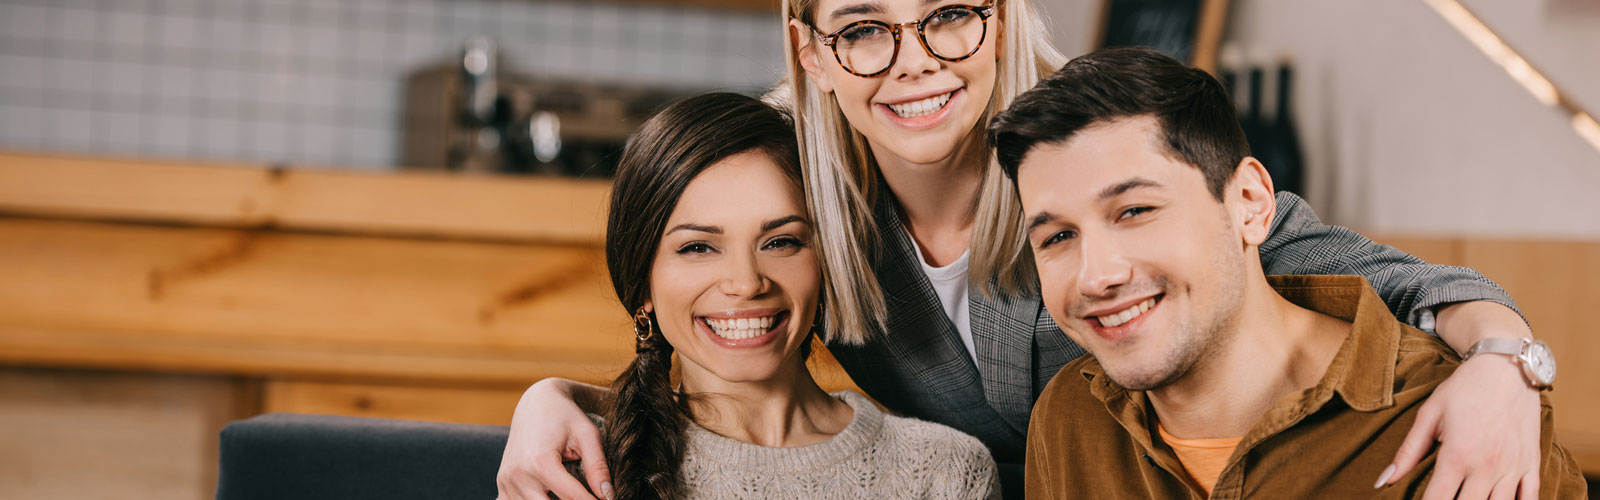 Cheerful woman in glasses hugging smiling friends